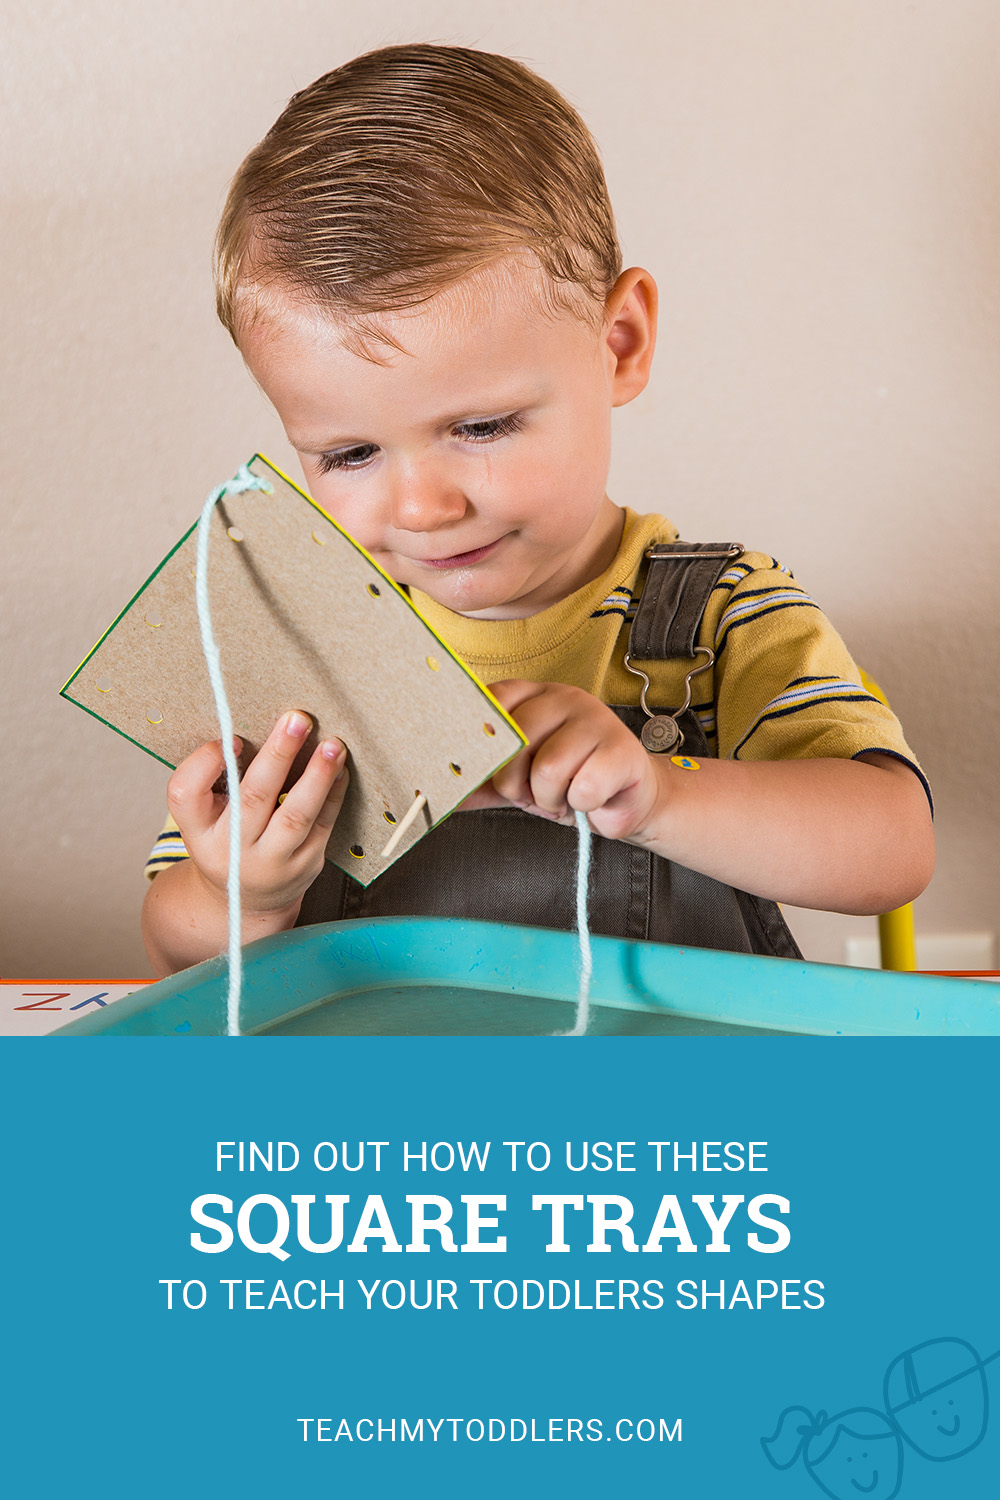 Find out how to use these square trays to teach your toddlers shapes